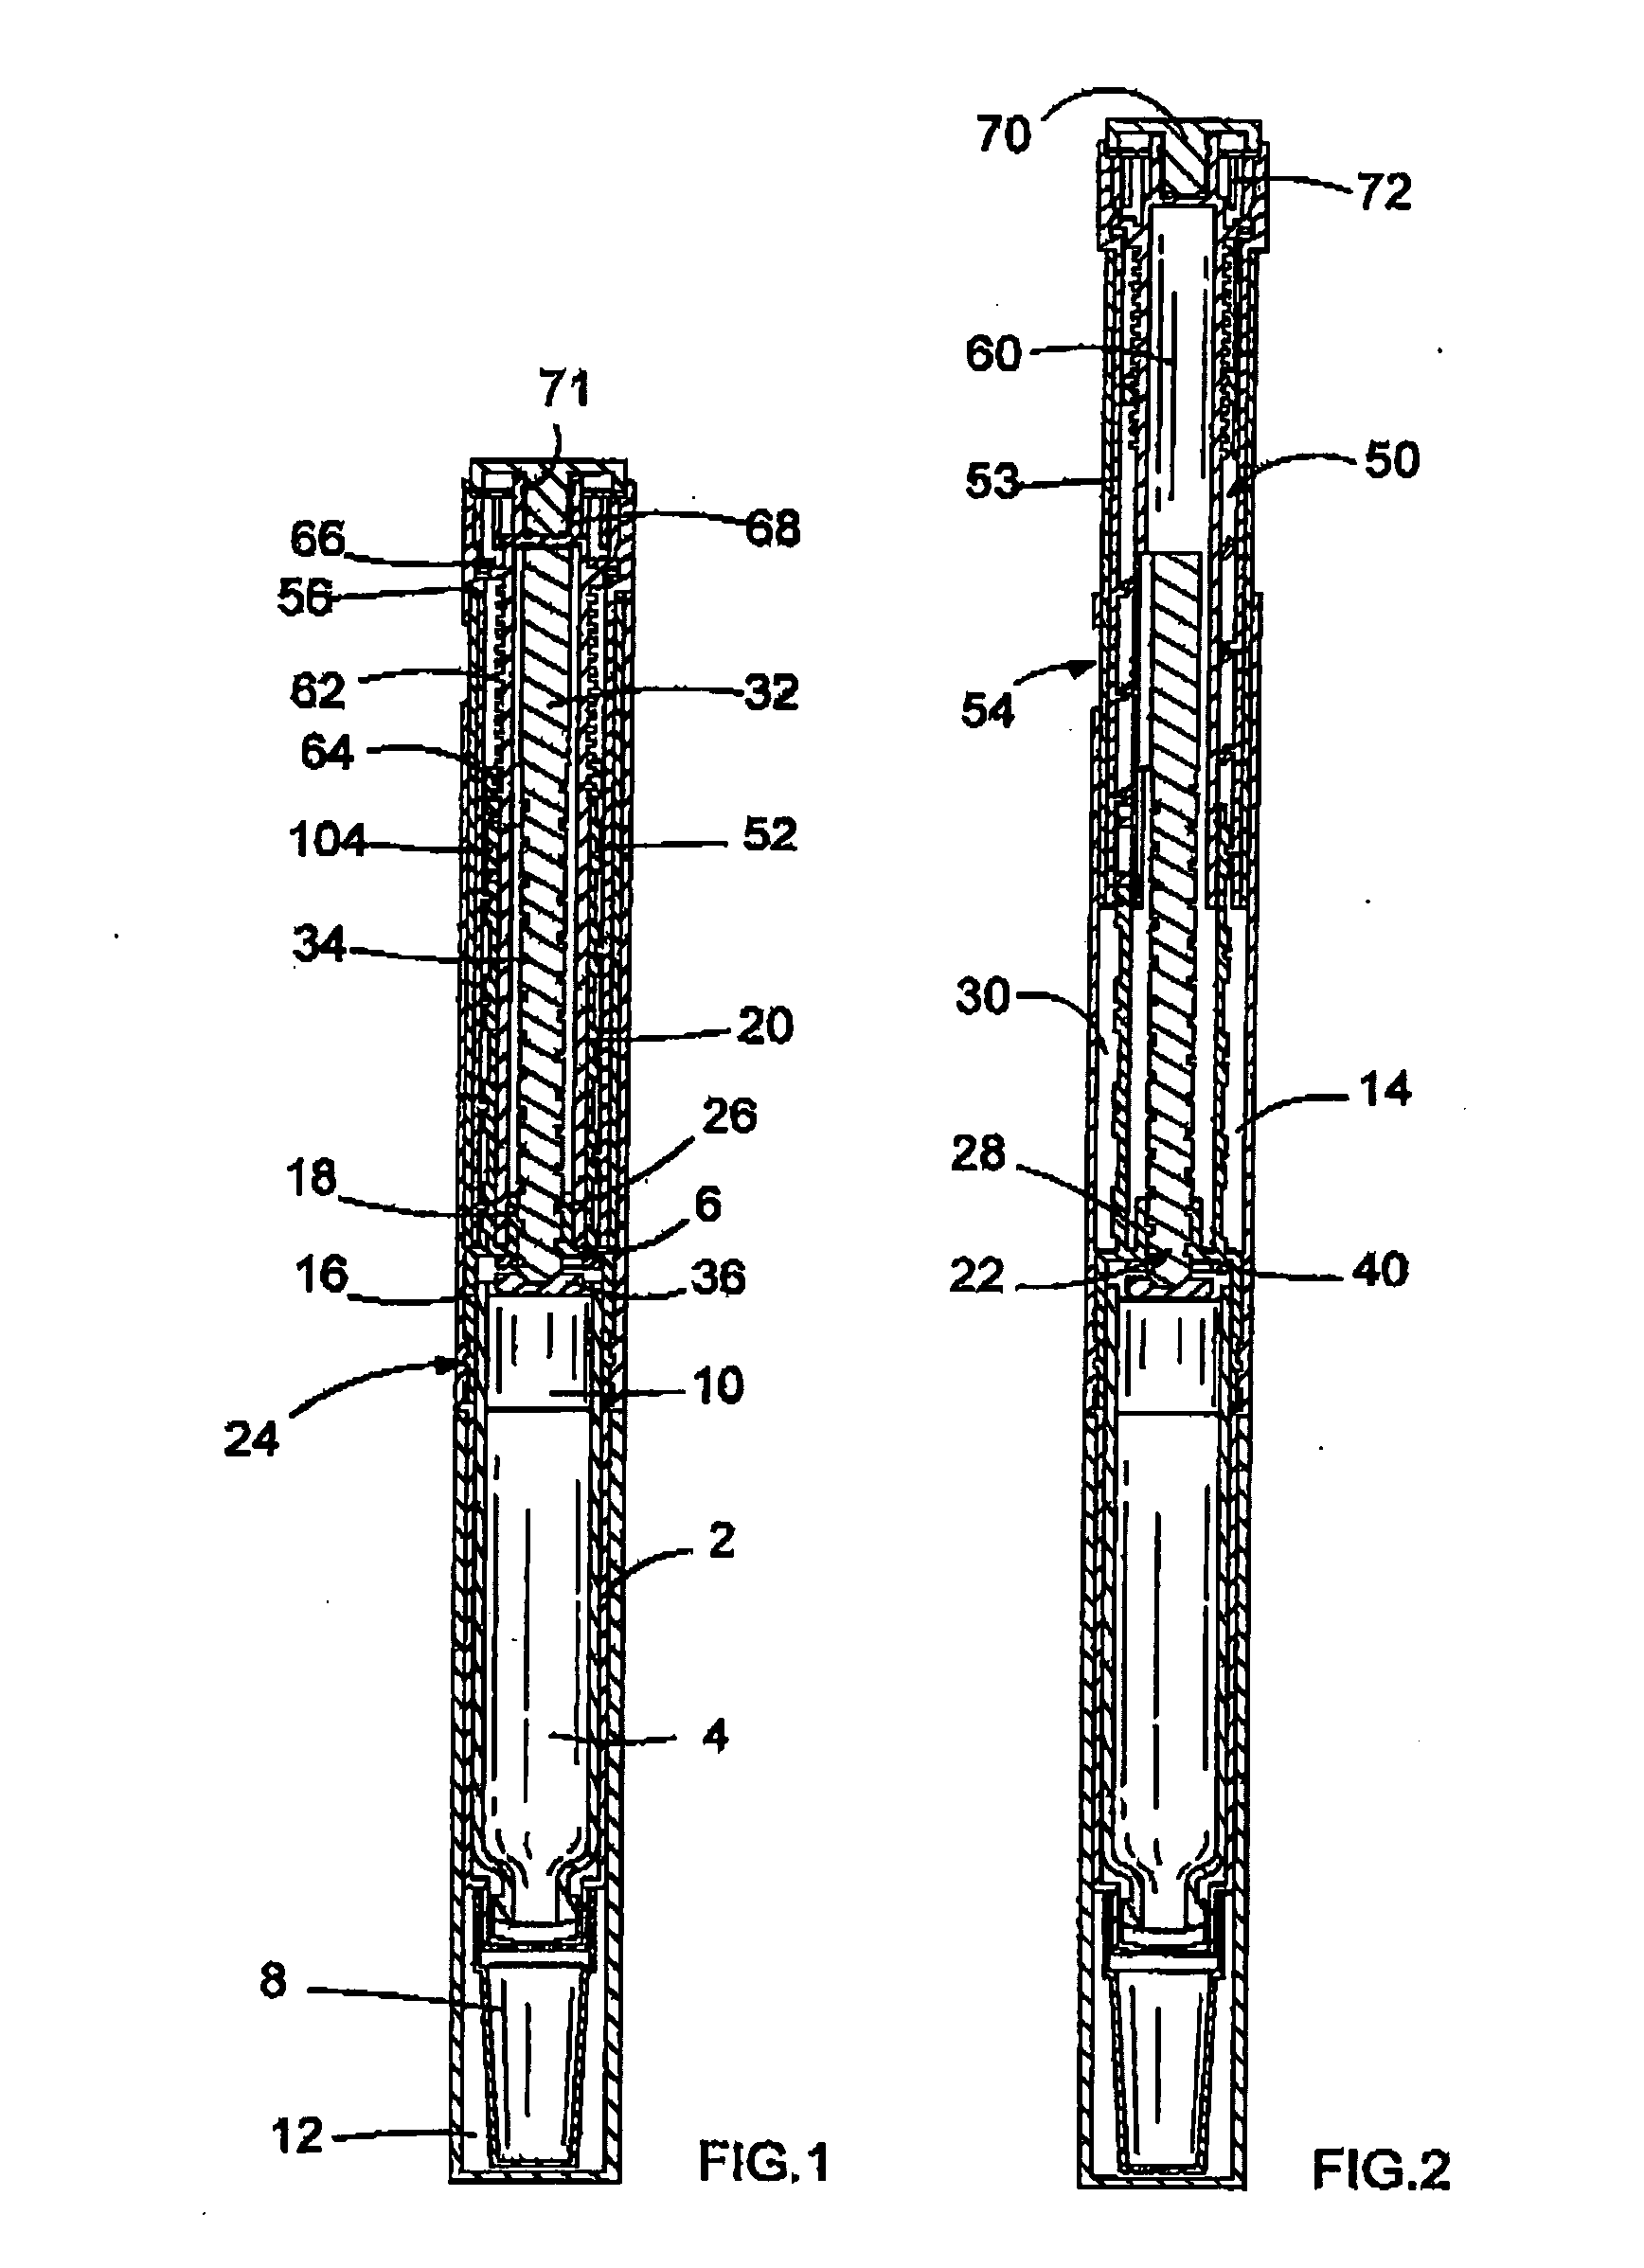 Drive mechanisms suitable for use in drug delivery devices